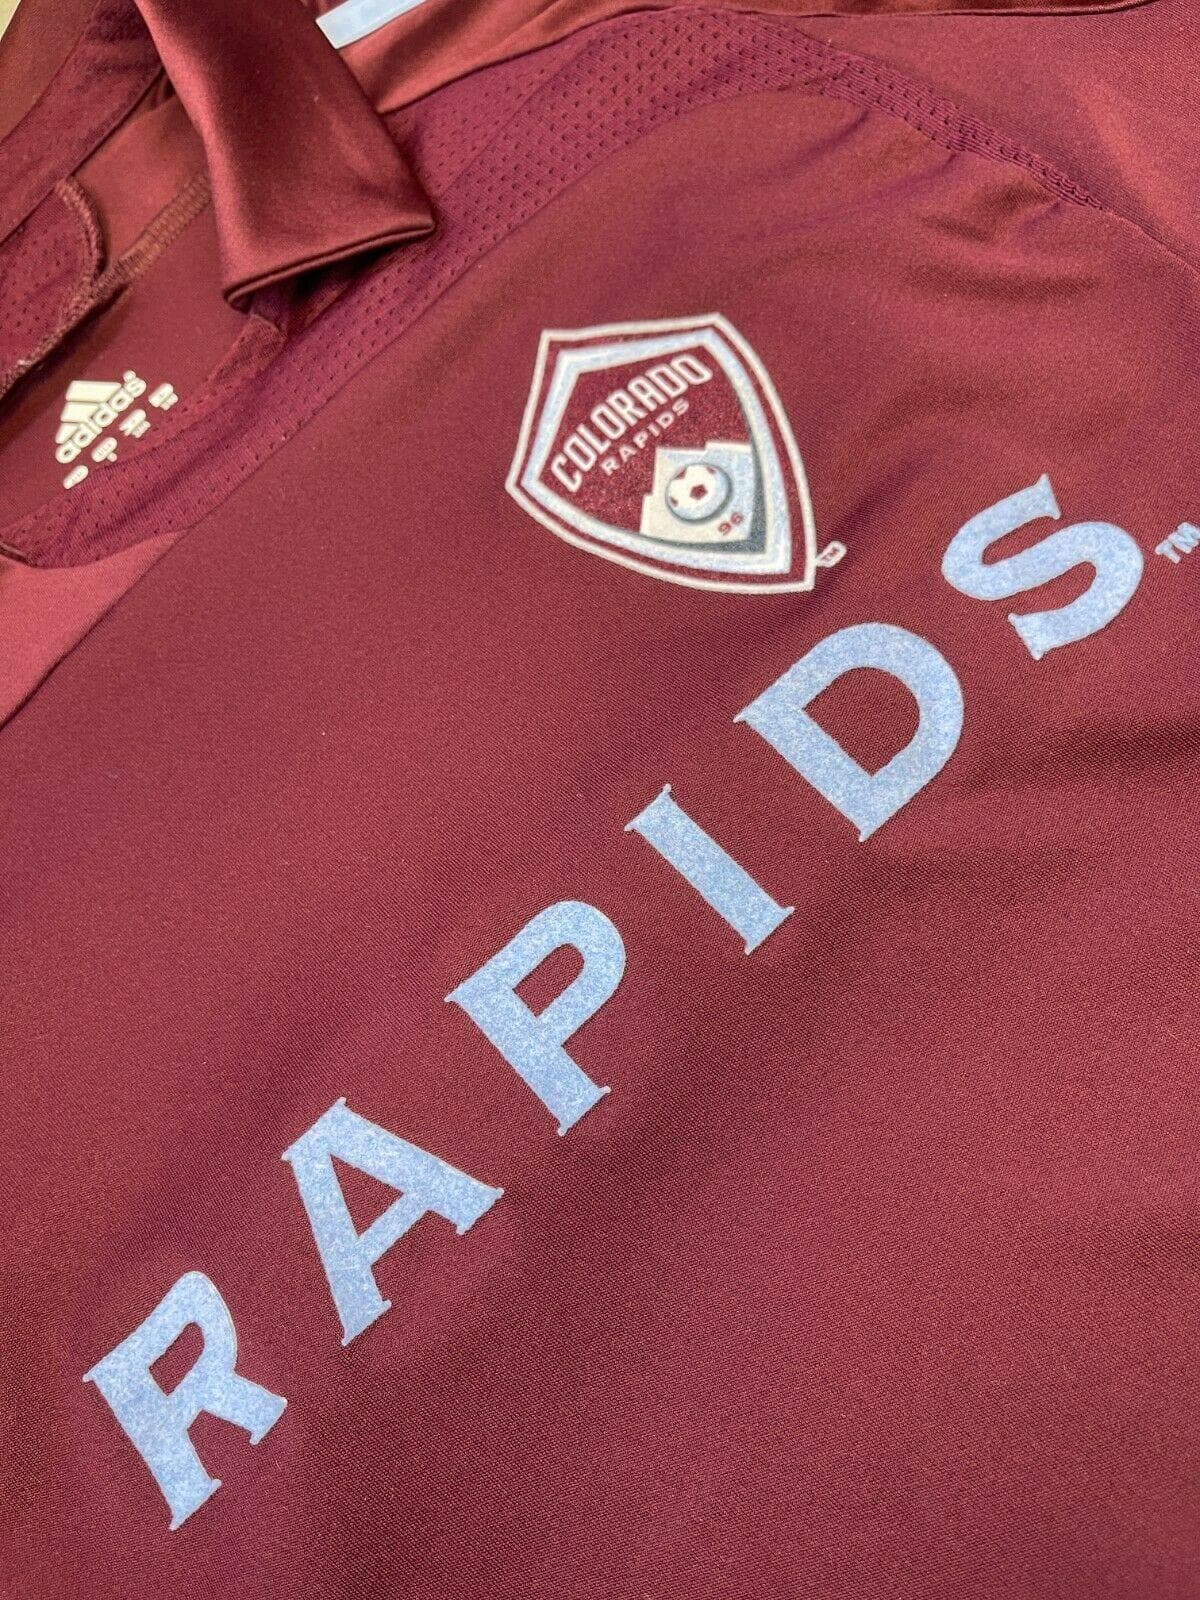 MLS Colorado Rapids Adidas Collared Jersey Youth Small 8-10